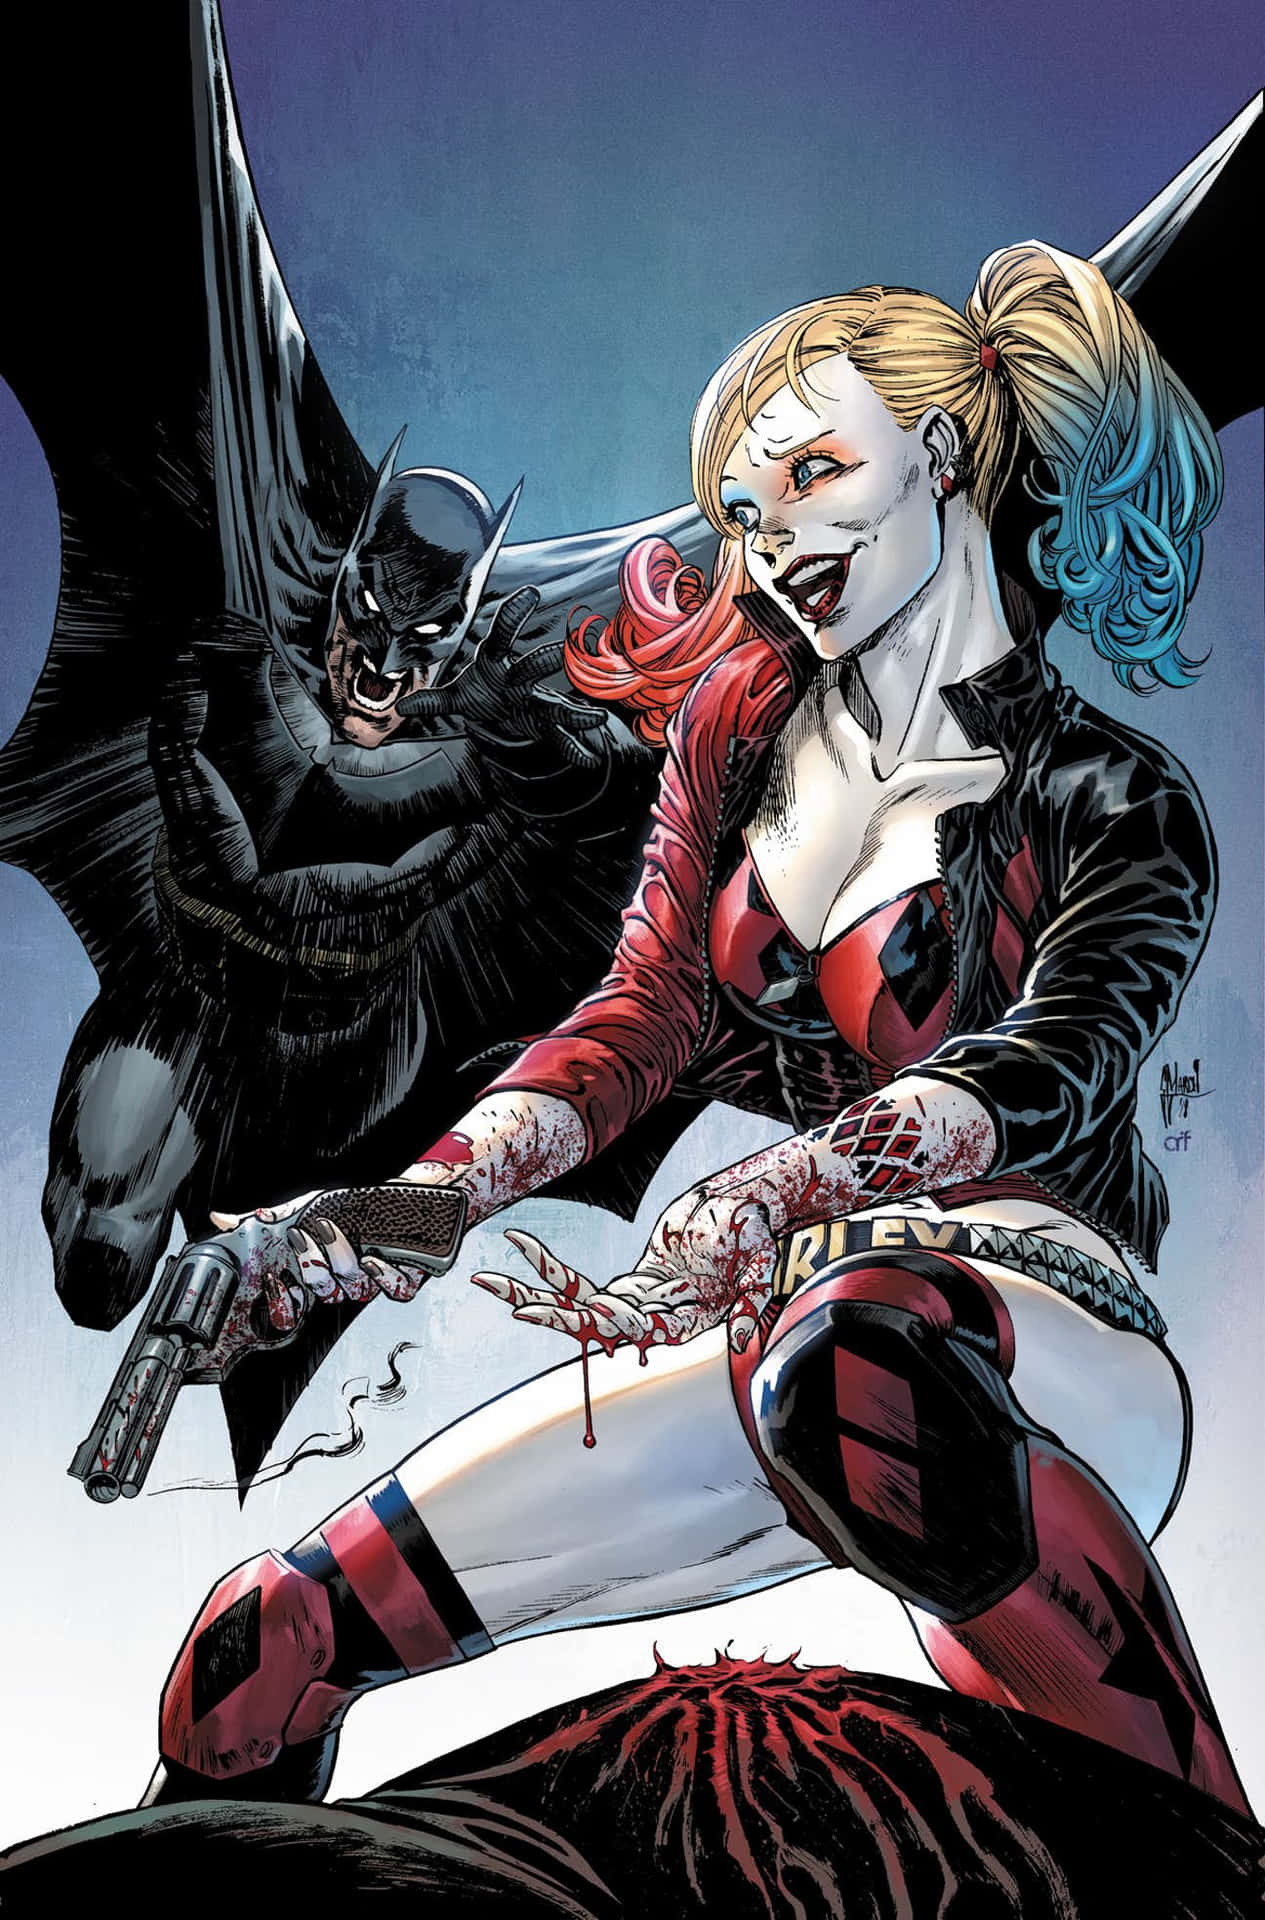 Harley Quinn and Batman face off in this intense, high-quality image Wallpaper